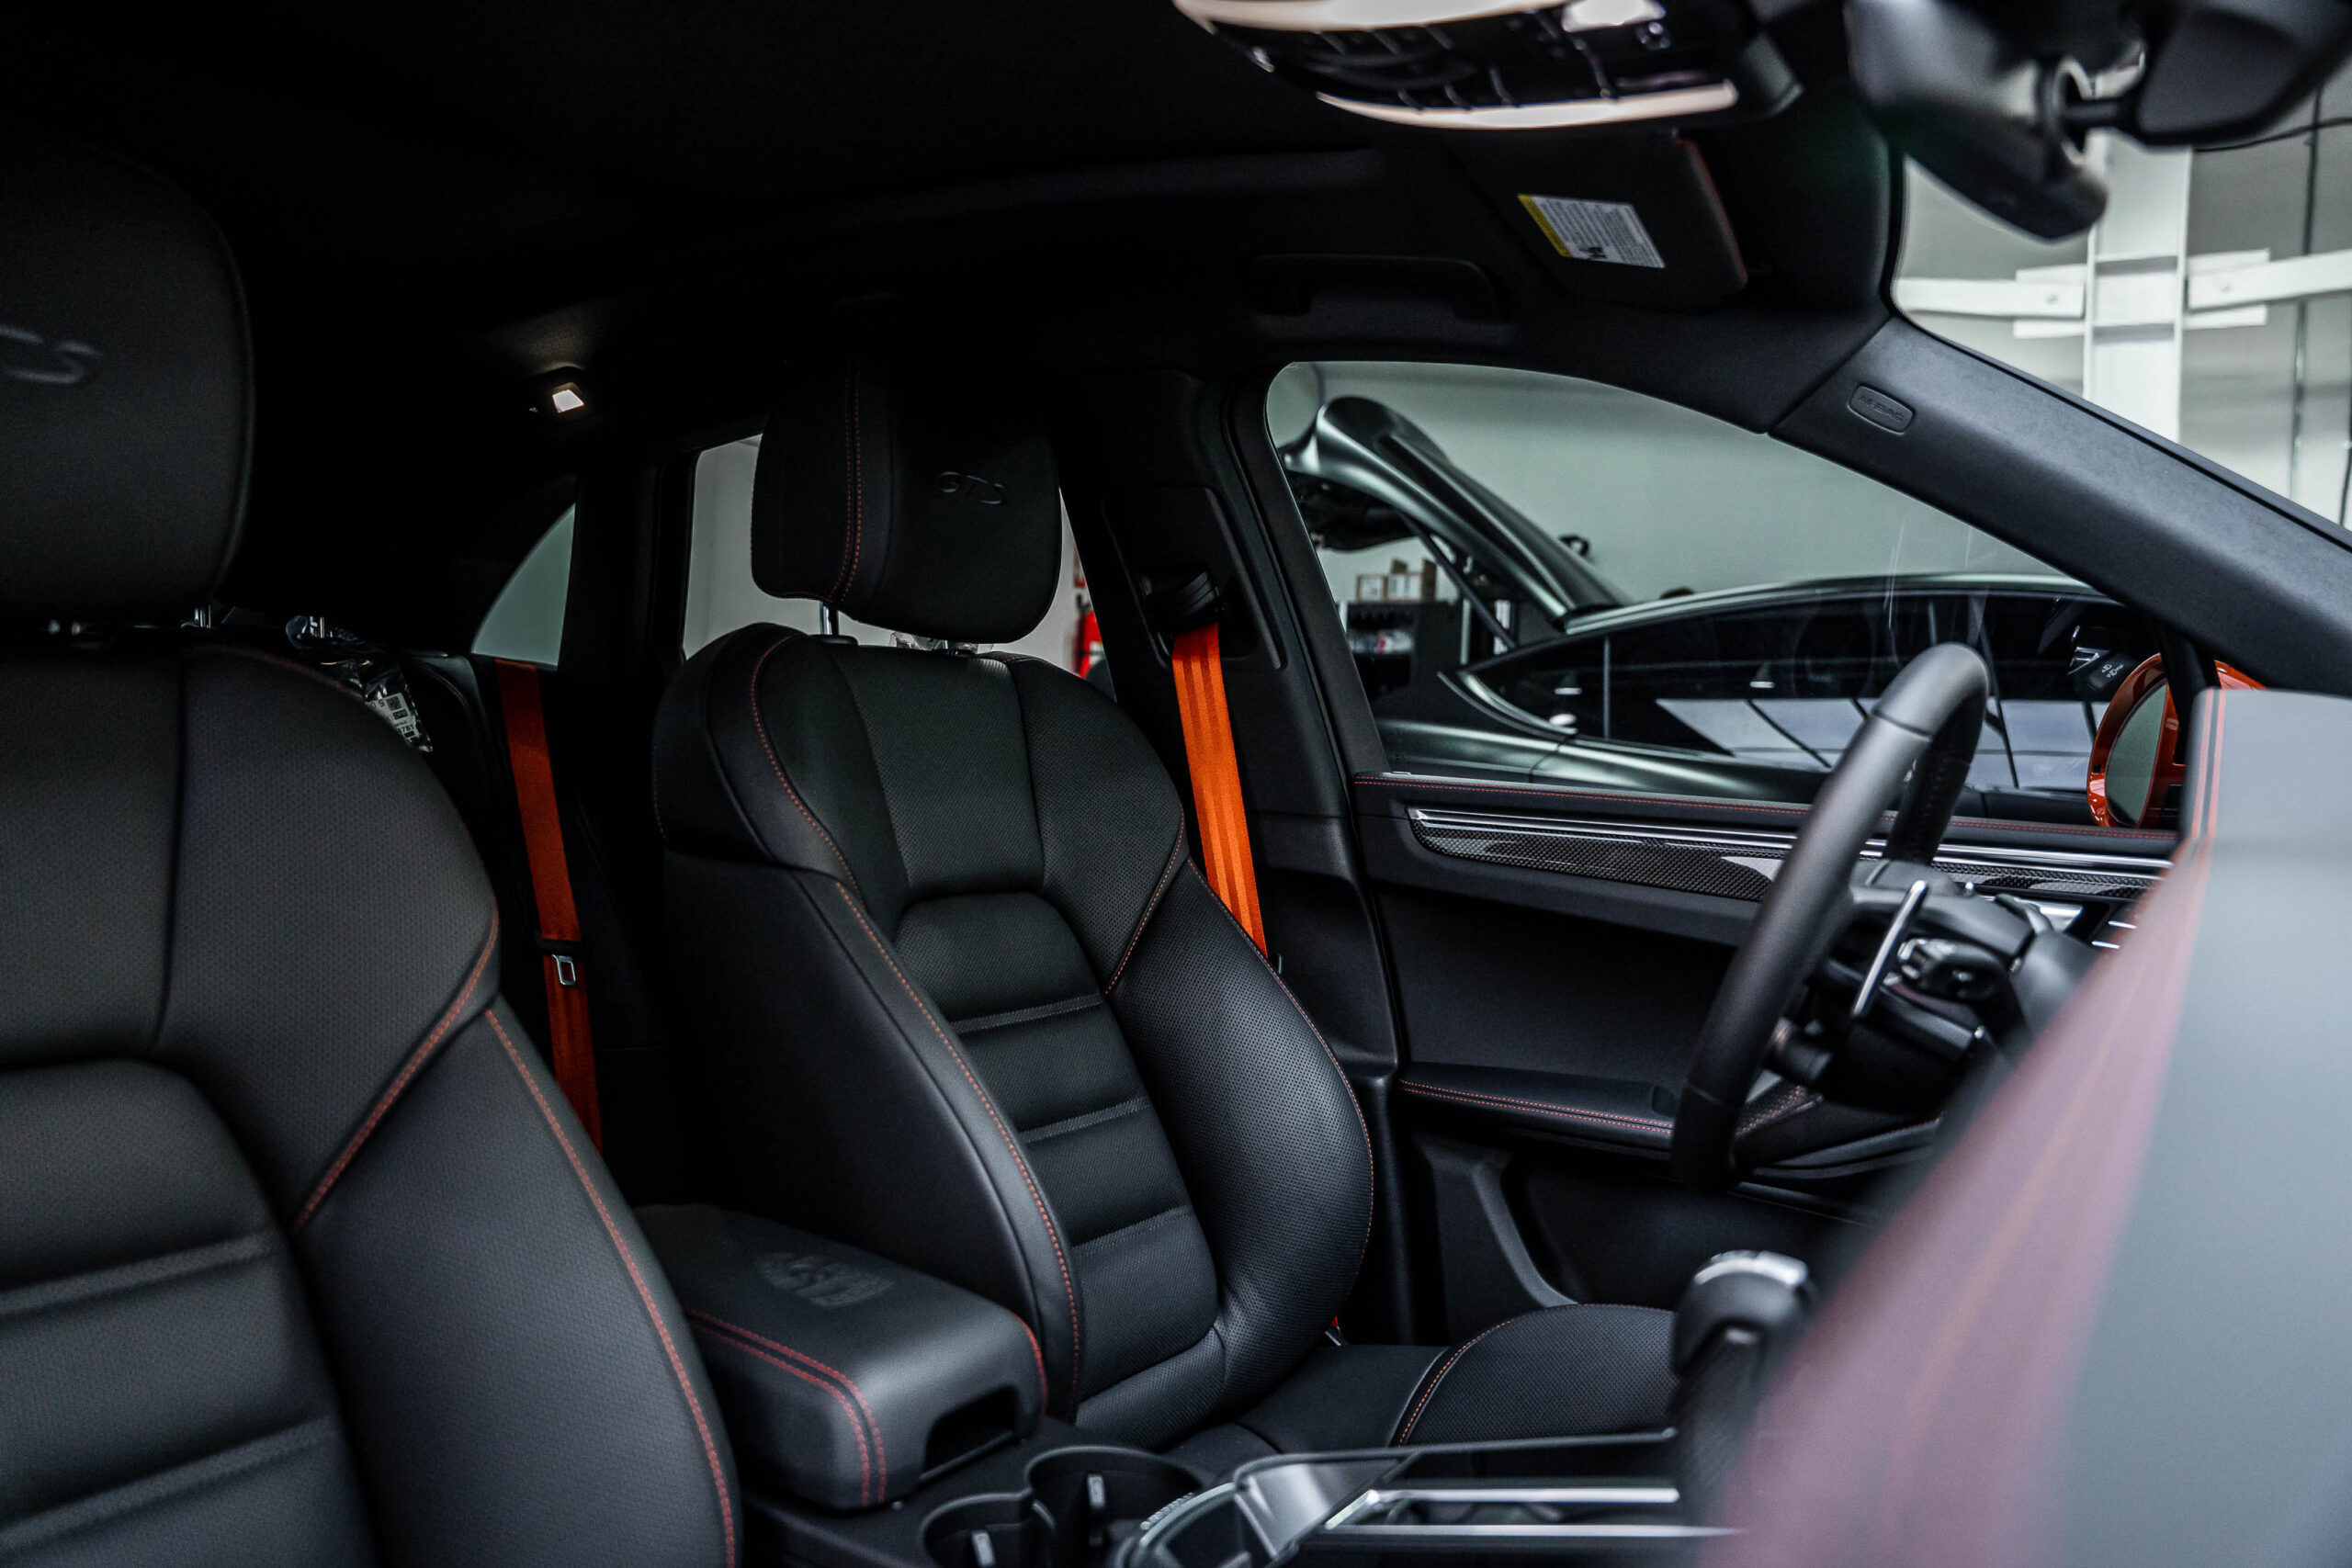 The interior of the Macan is looking spotless